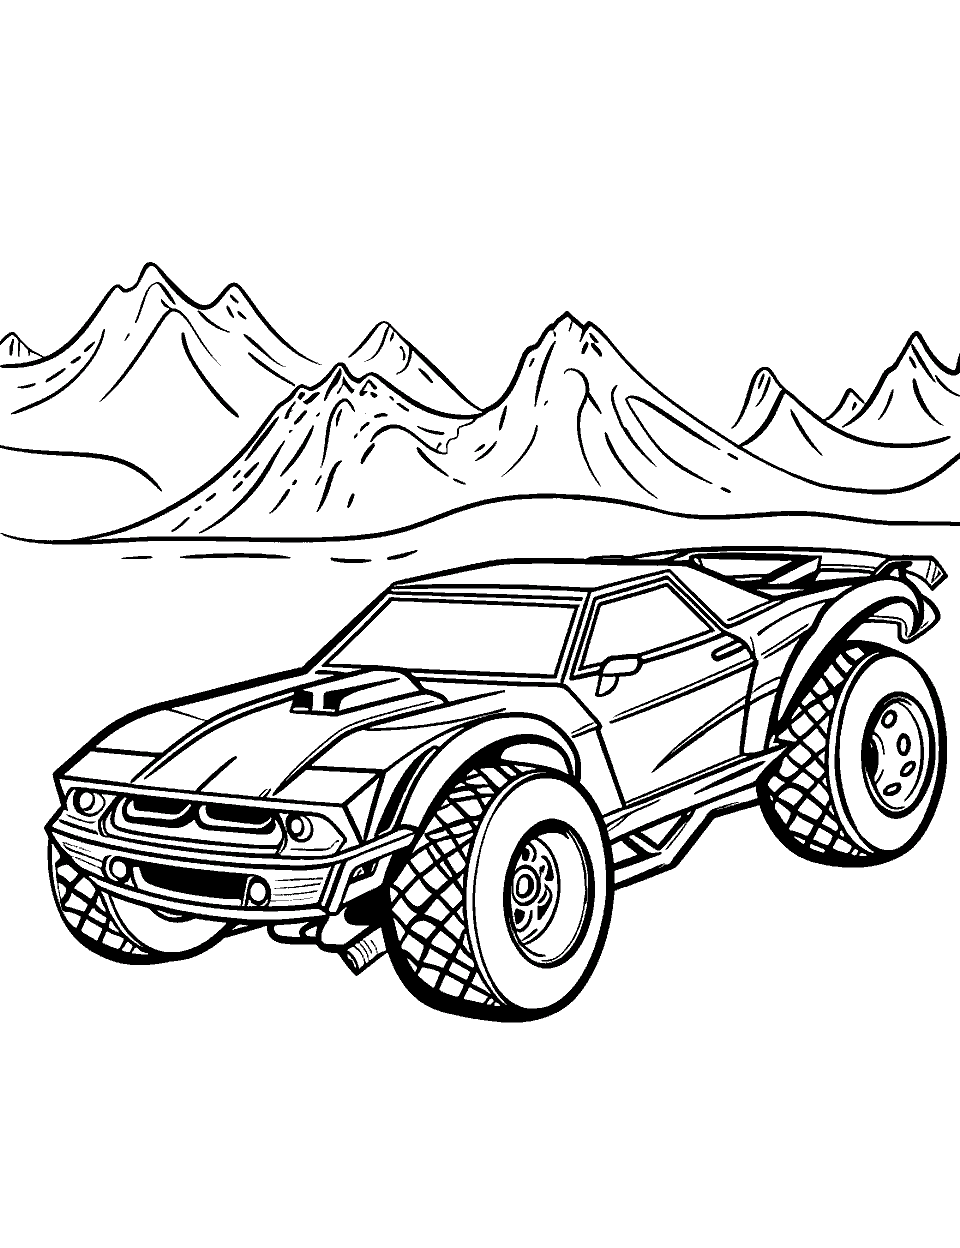 Arctic Ice Racer Coloring Page - A Hot Wheels car ice racing, with snow-capped mountains in the distance.